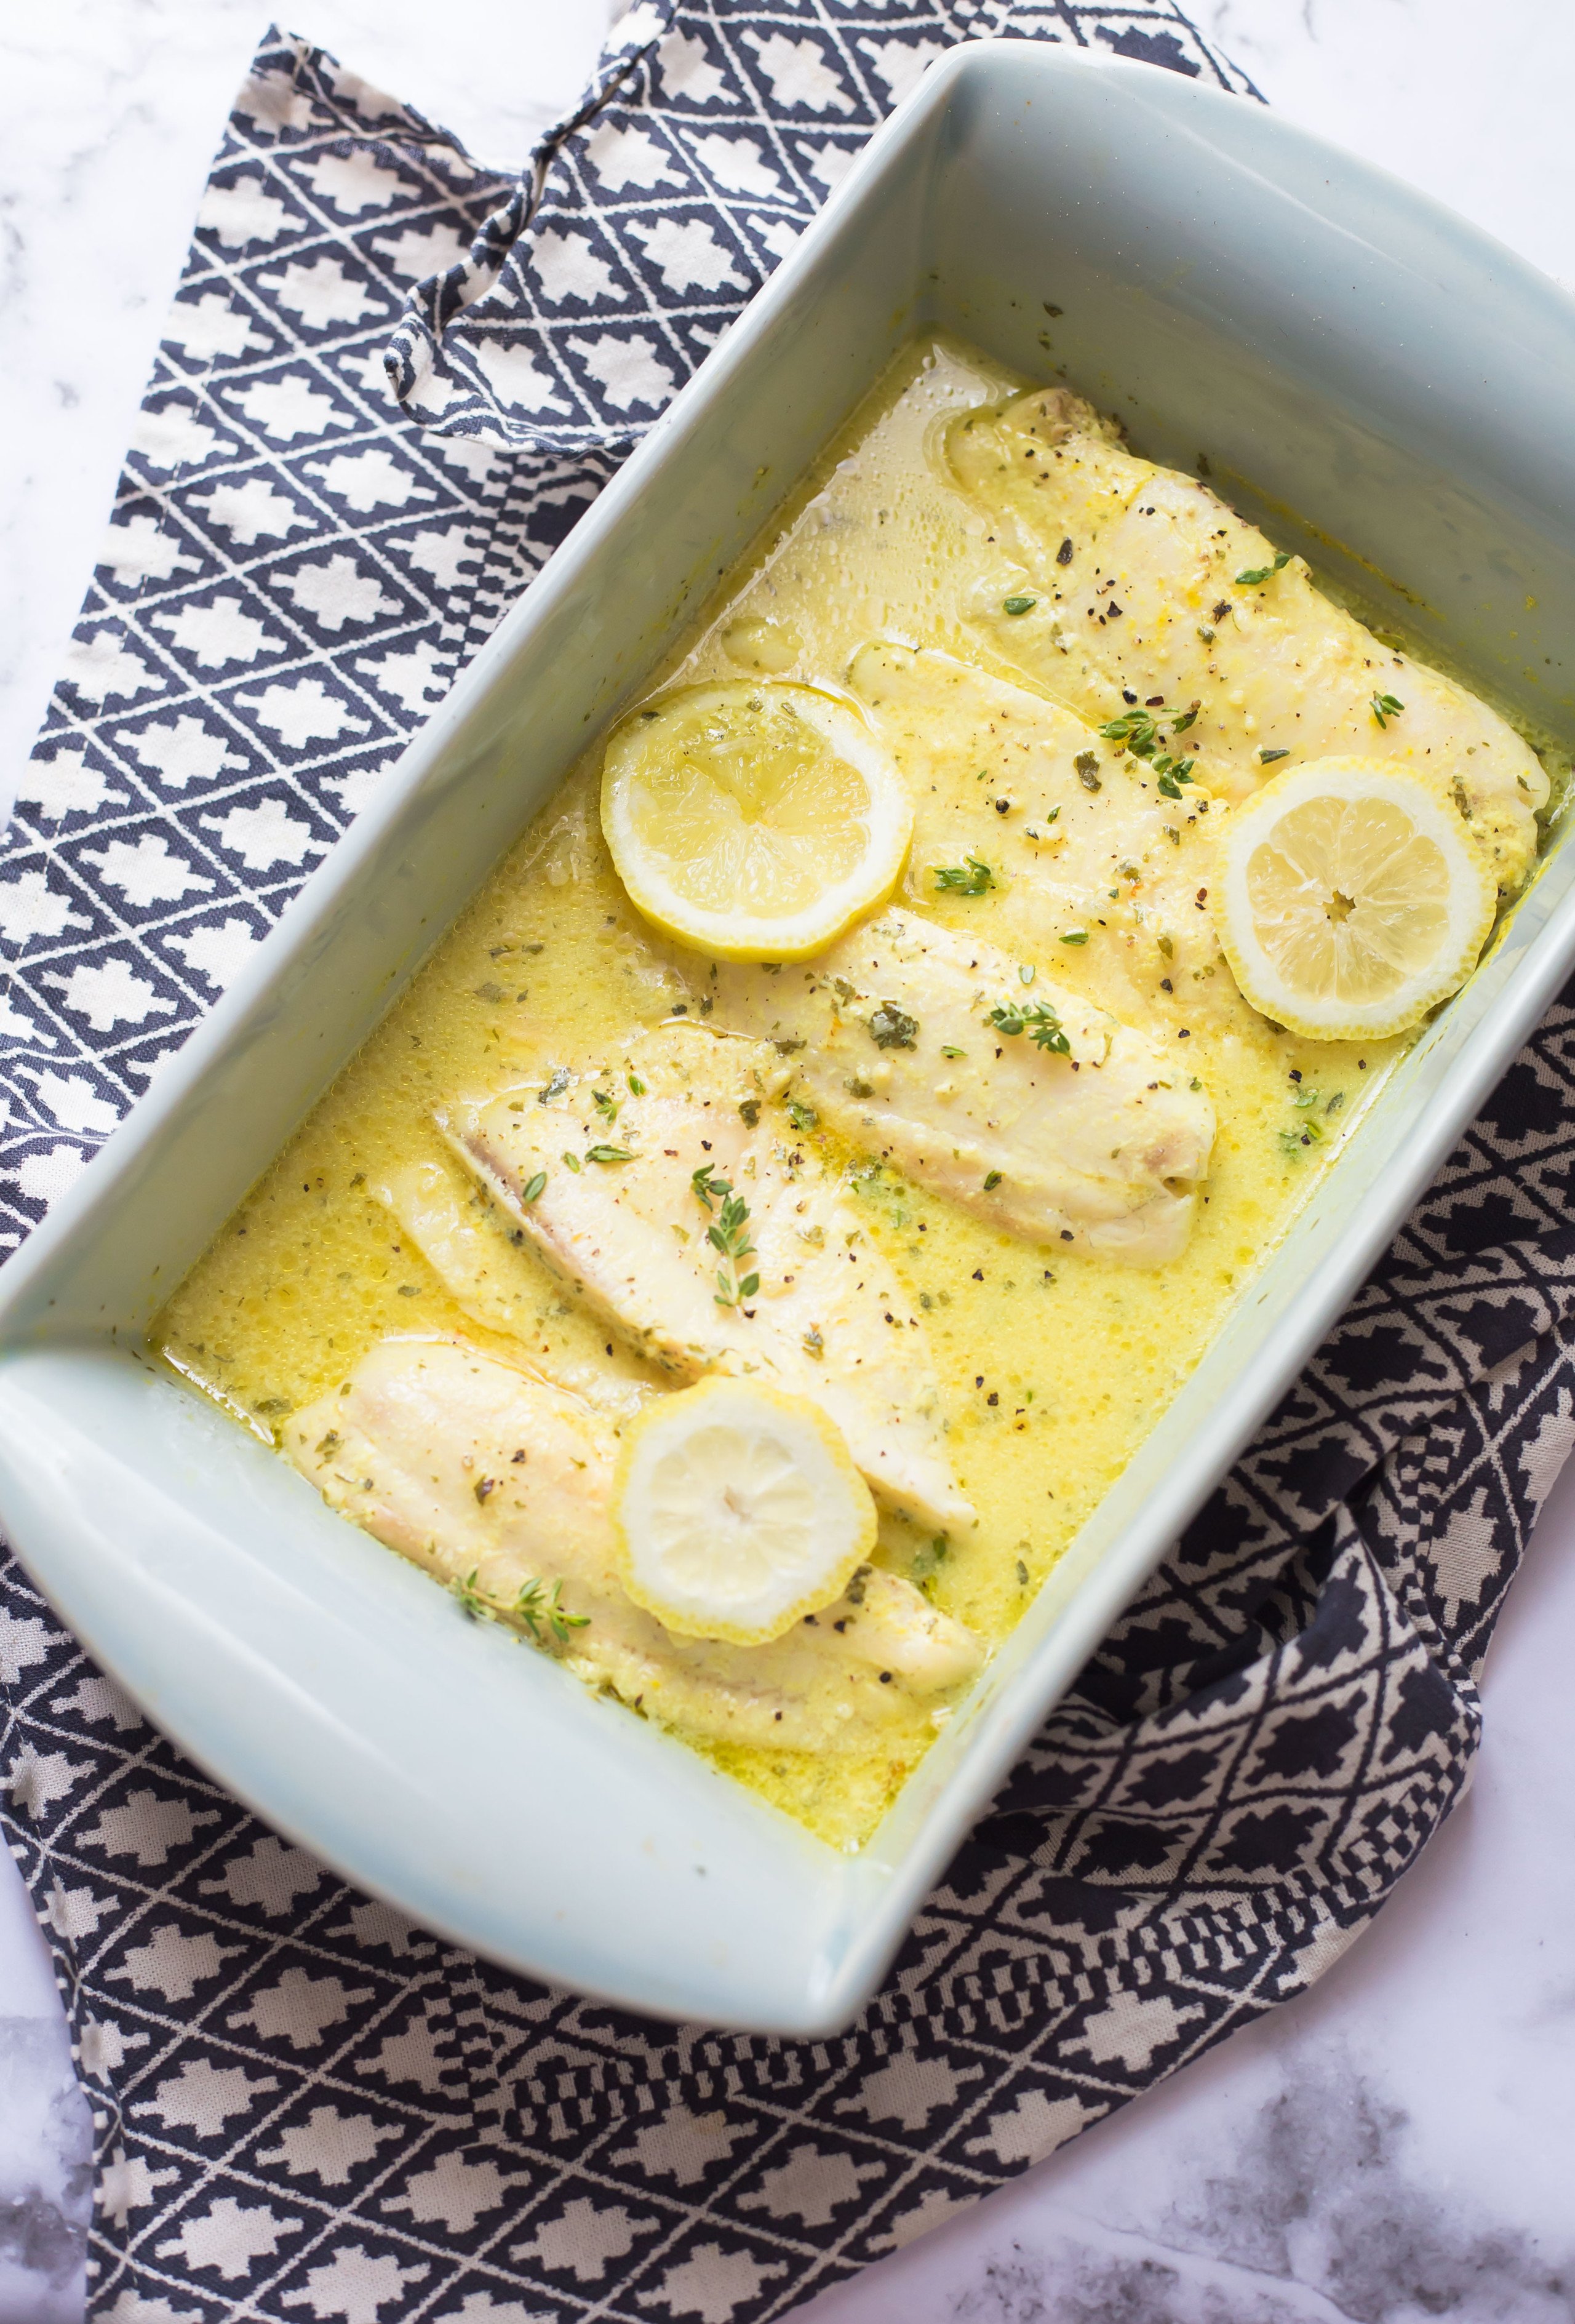 Fish fillets in a lemon and mustard sauce in a casserole dish